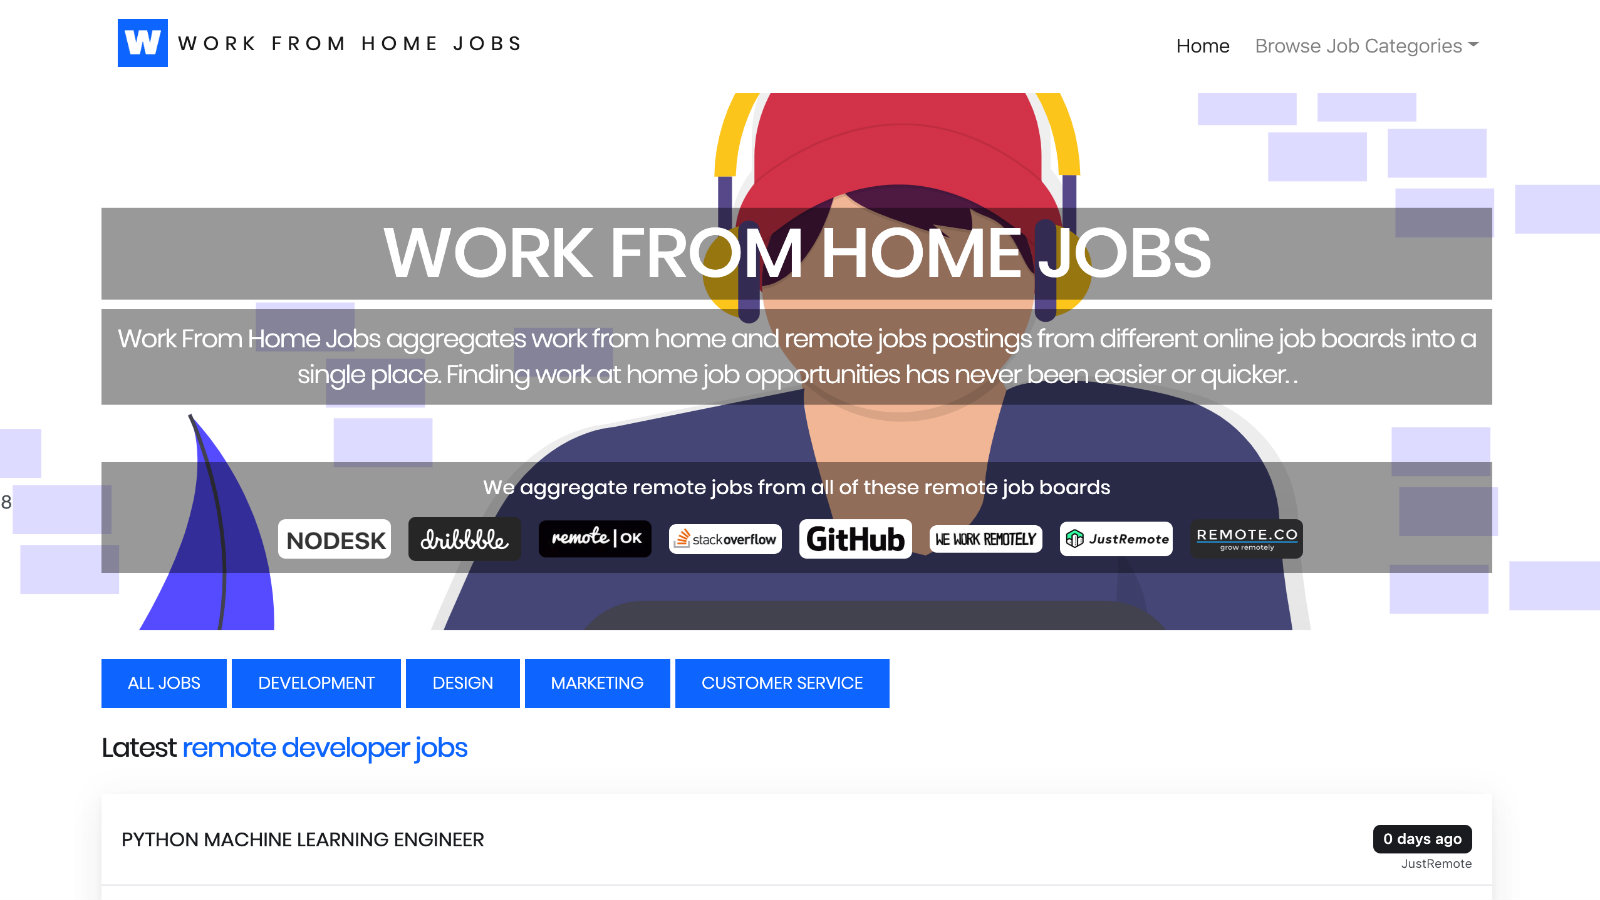 Find detailed information about Work From Home Jobs